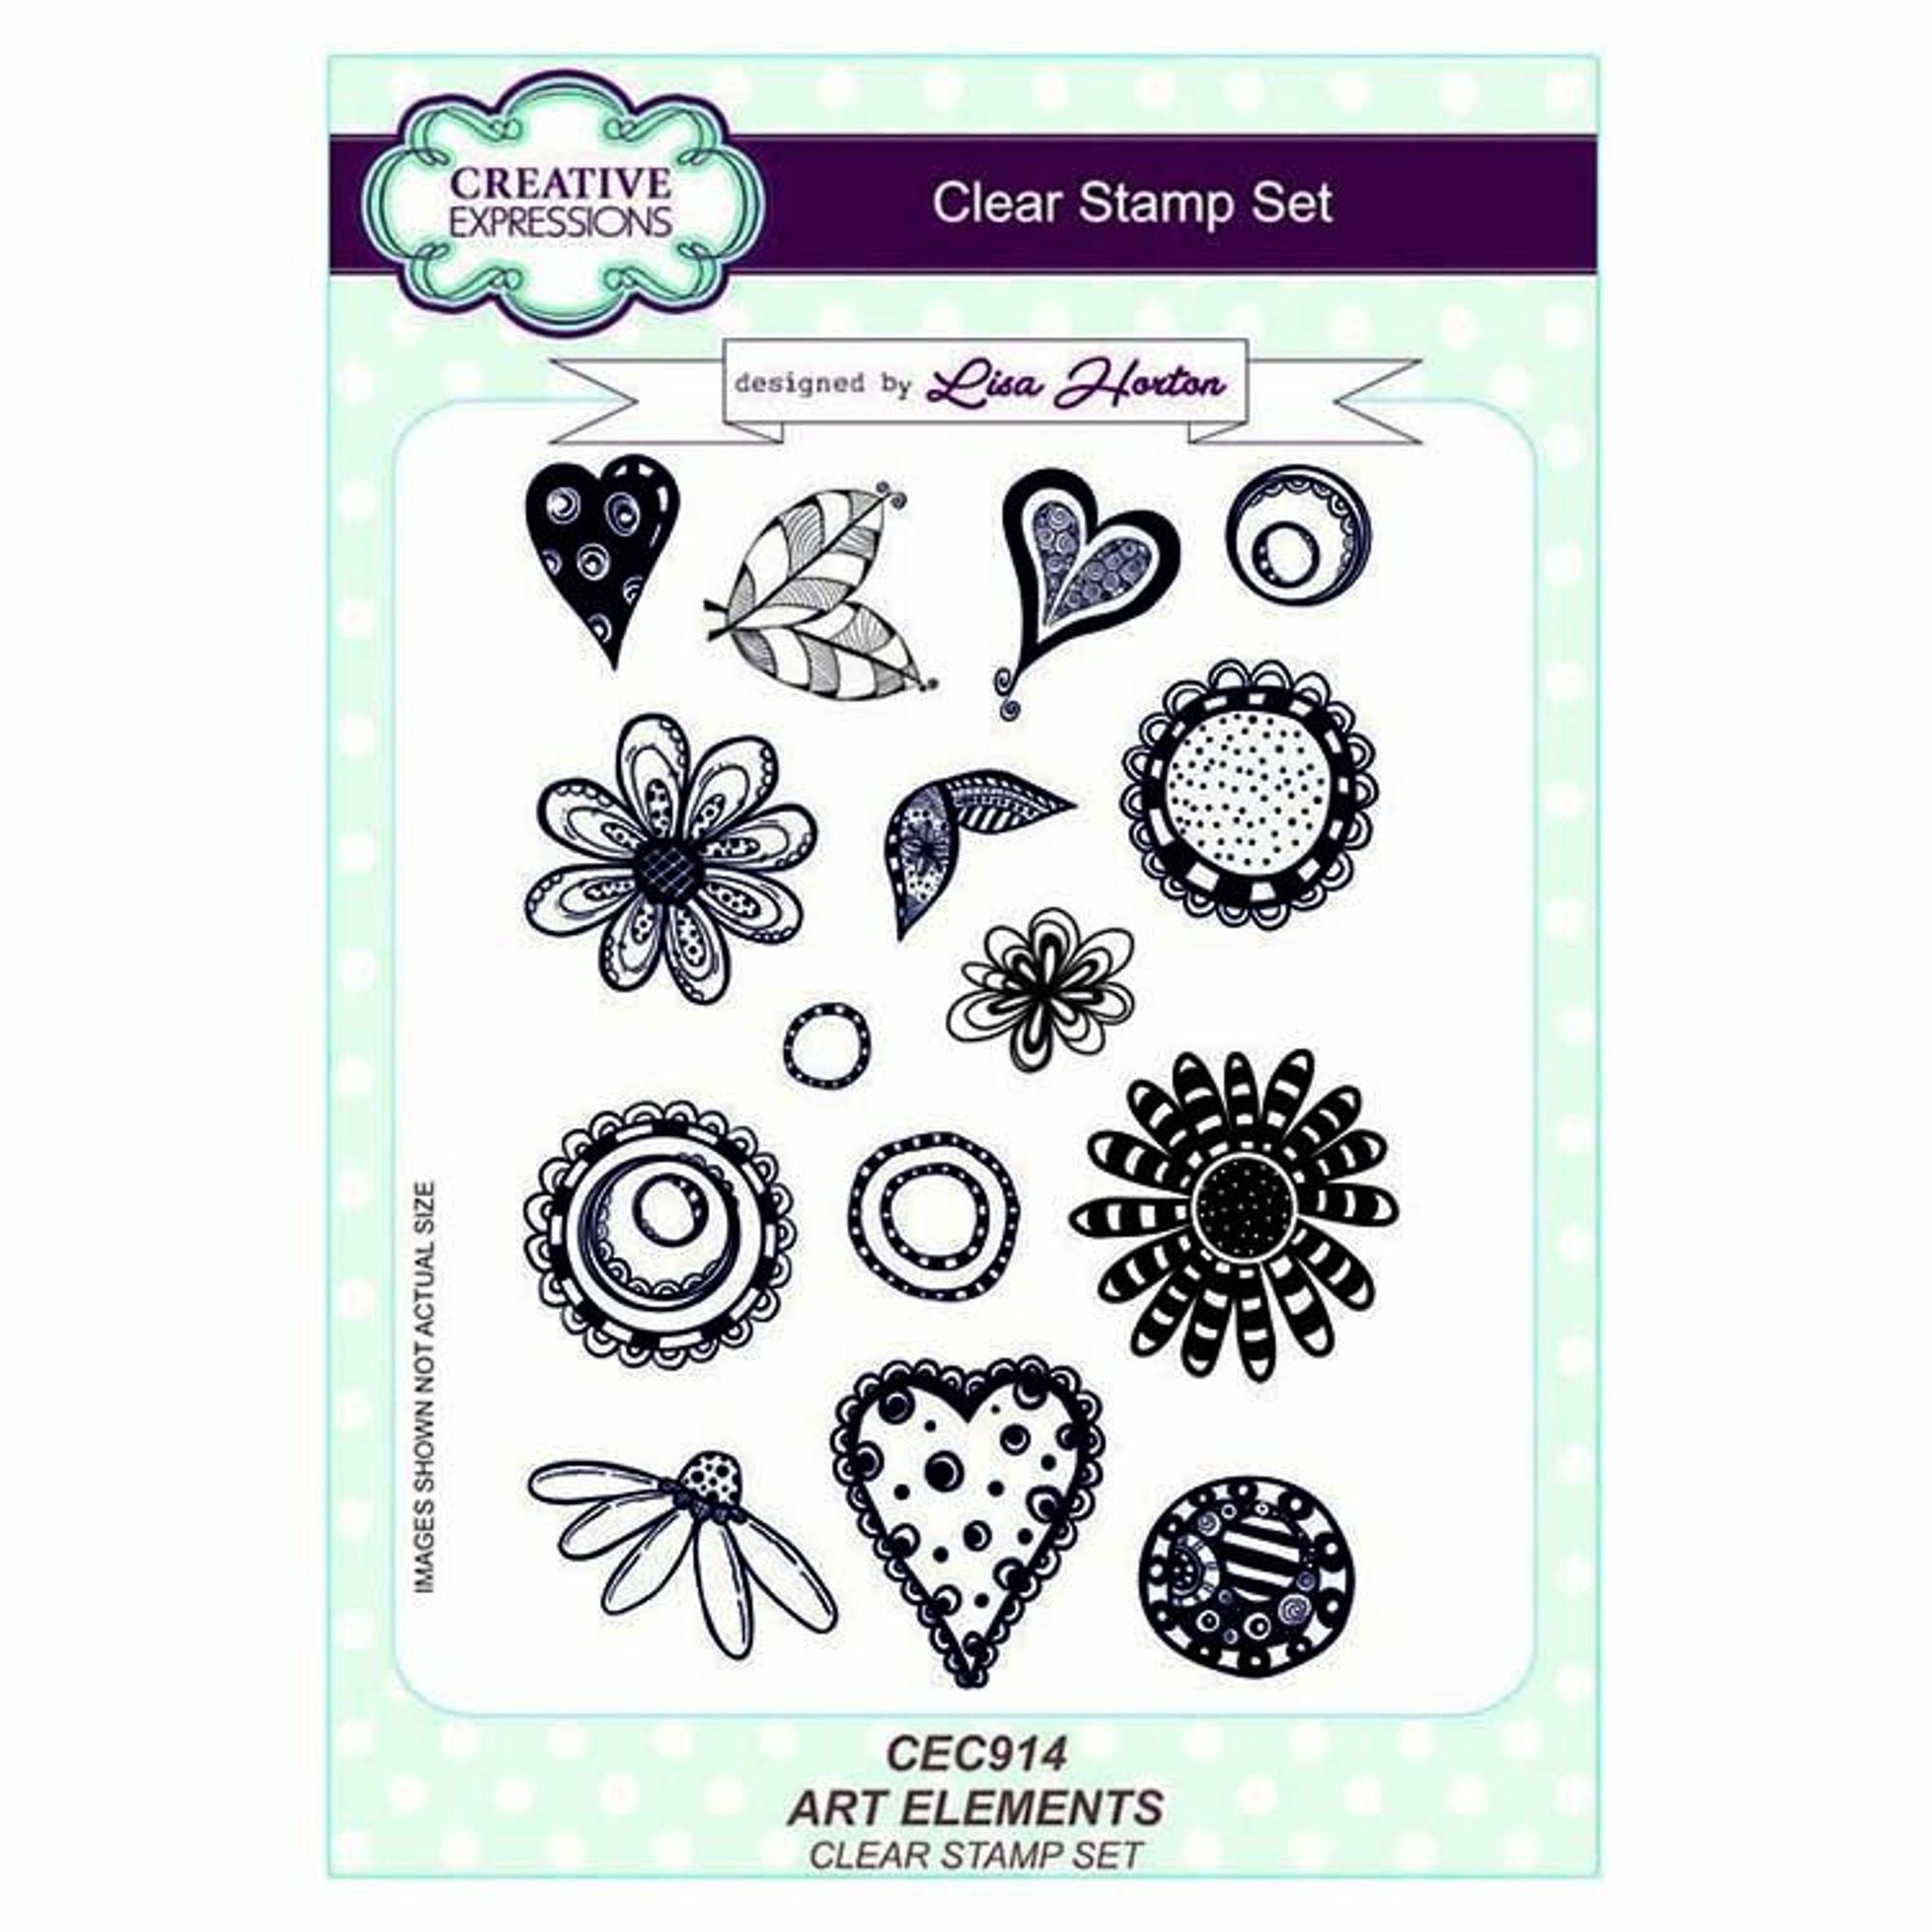 Creative Expressions Art Elements A5 Clear Stamp Set